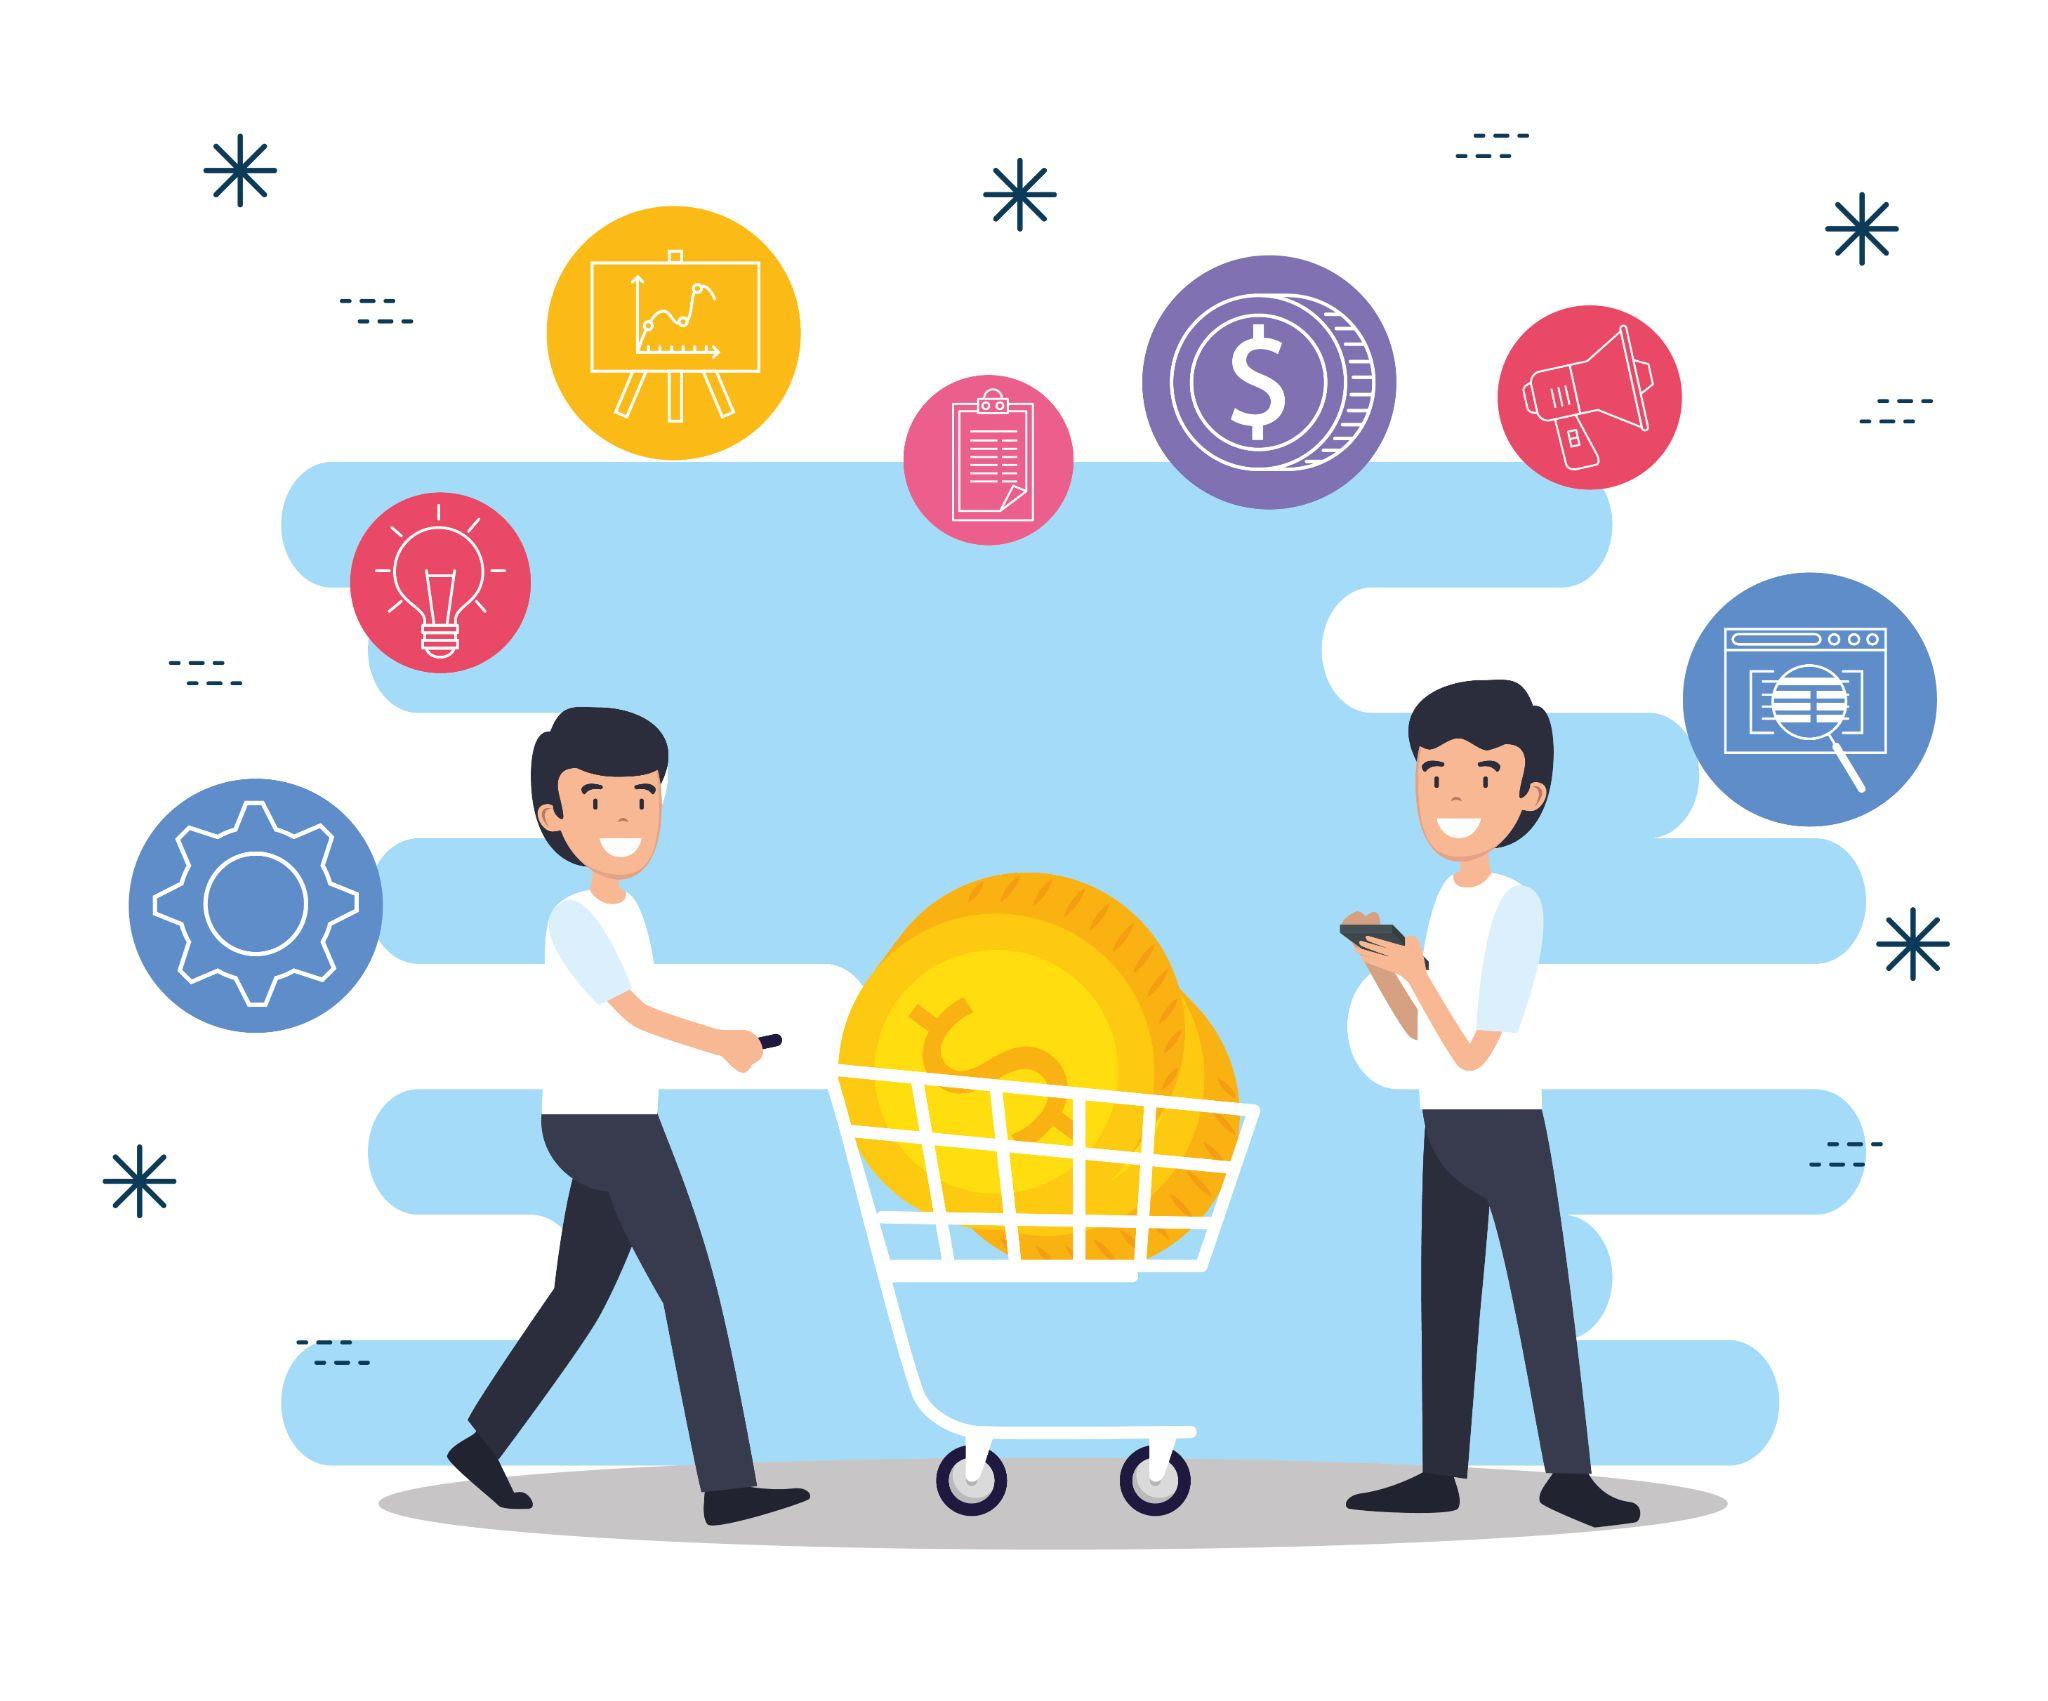 Features Crucial for B2B eCommerce